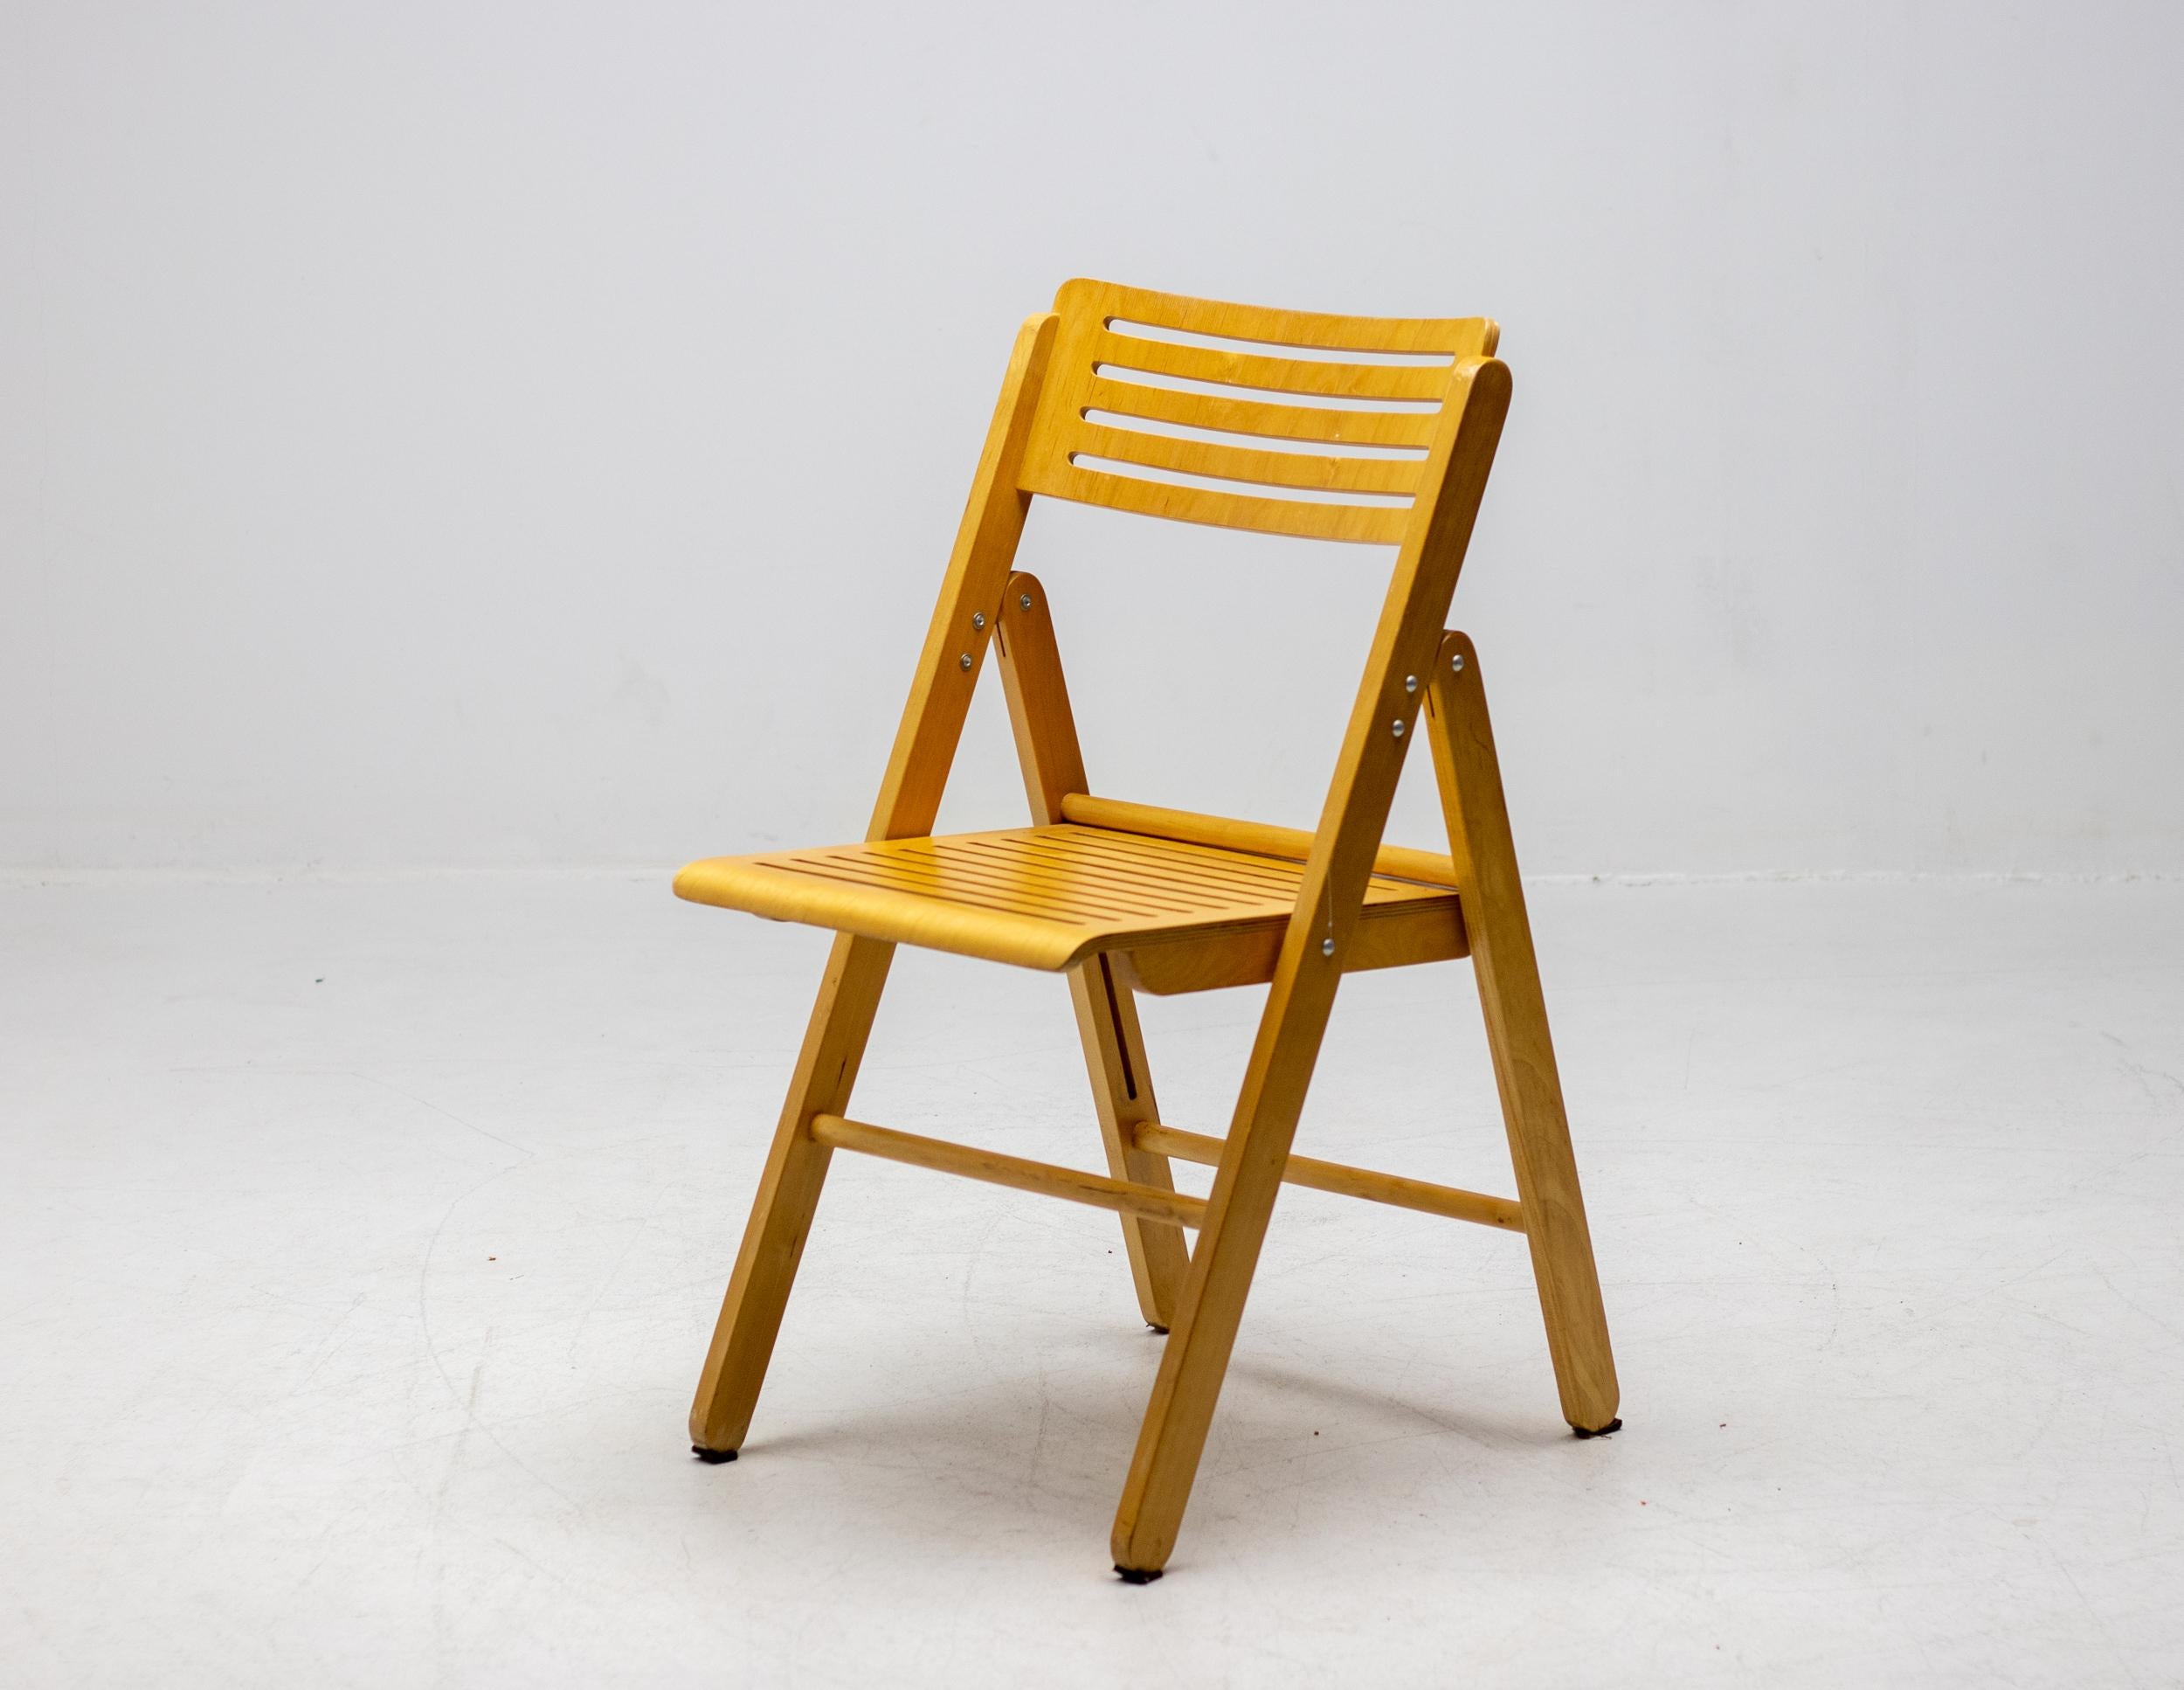 Set of 4 foldable chairs in plywood, made in The Netherlands circa 1980.  Ingeniously designed practical and sturdy chairs in very good condition. These folding chairs offer a versatile seating solution with numerous benefits. Their collapsible